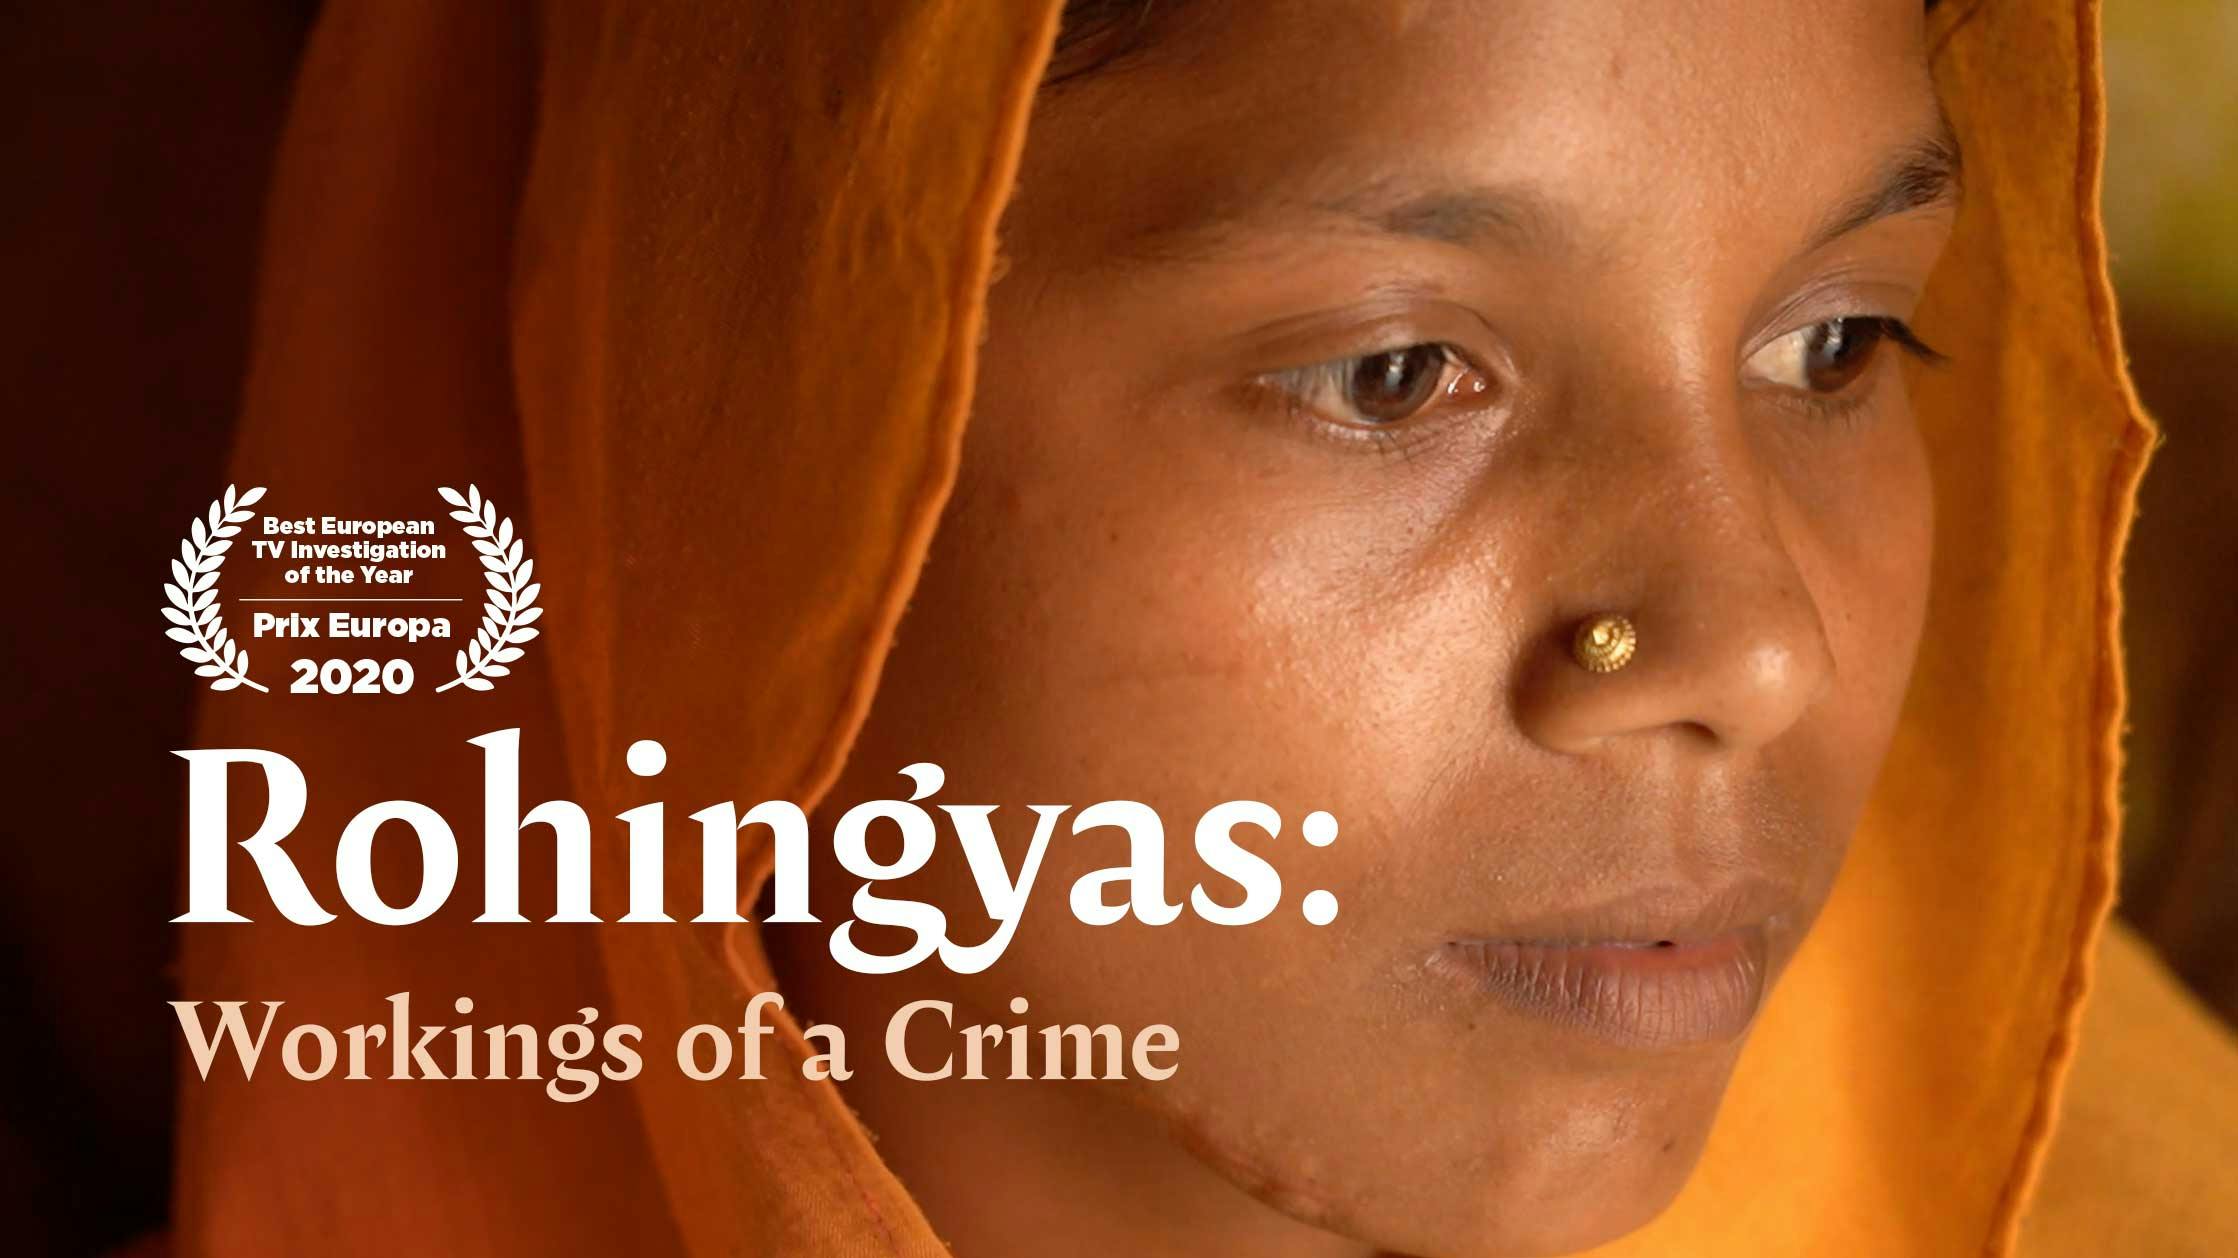 Rohingyas: Workings Of A Crime